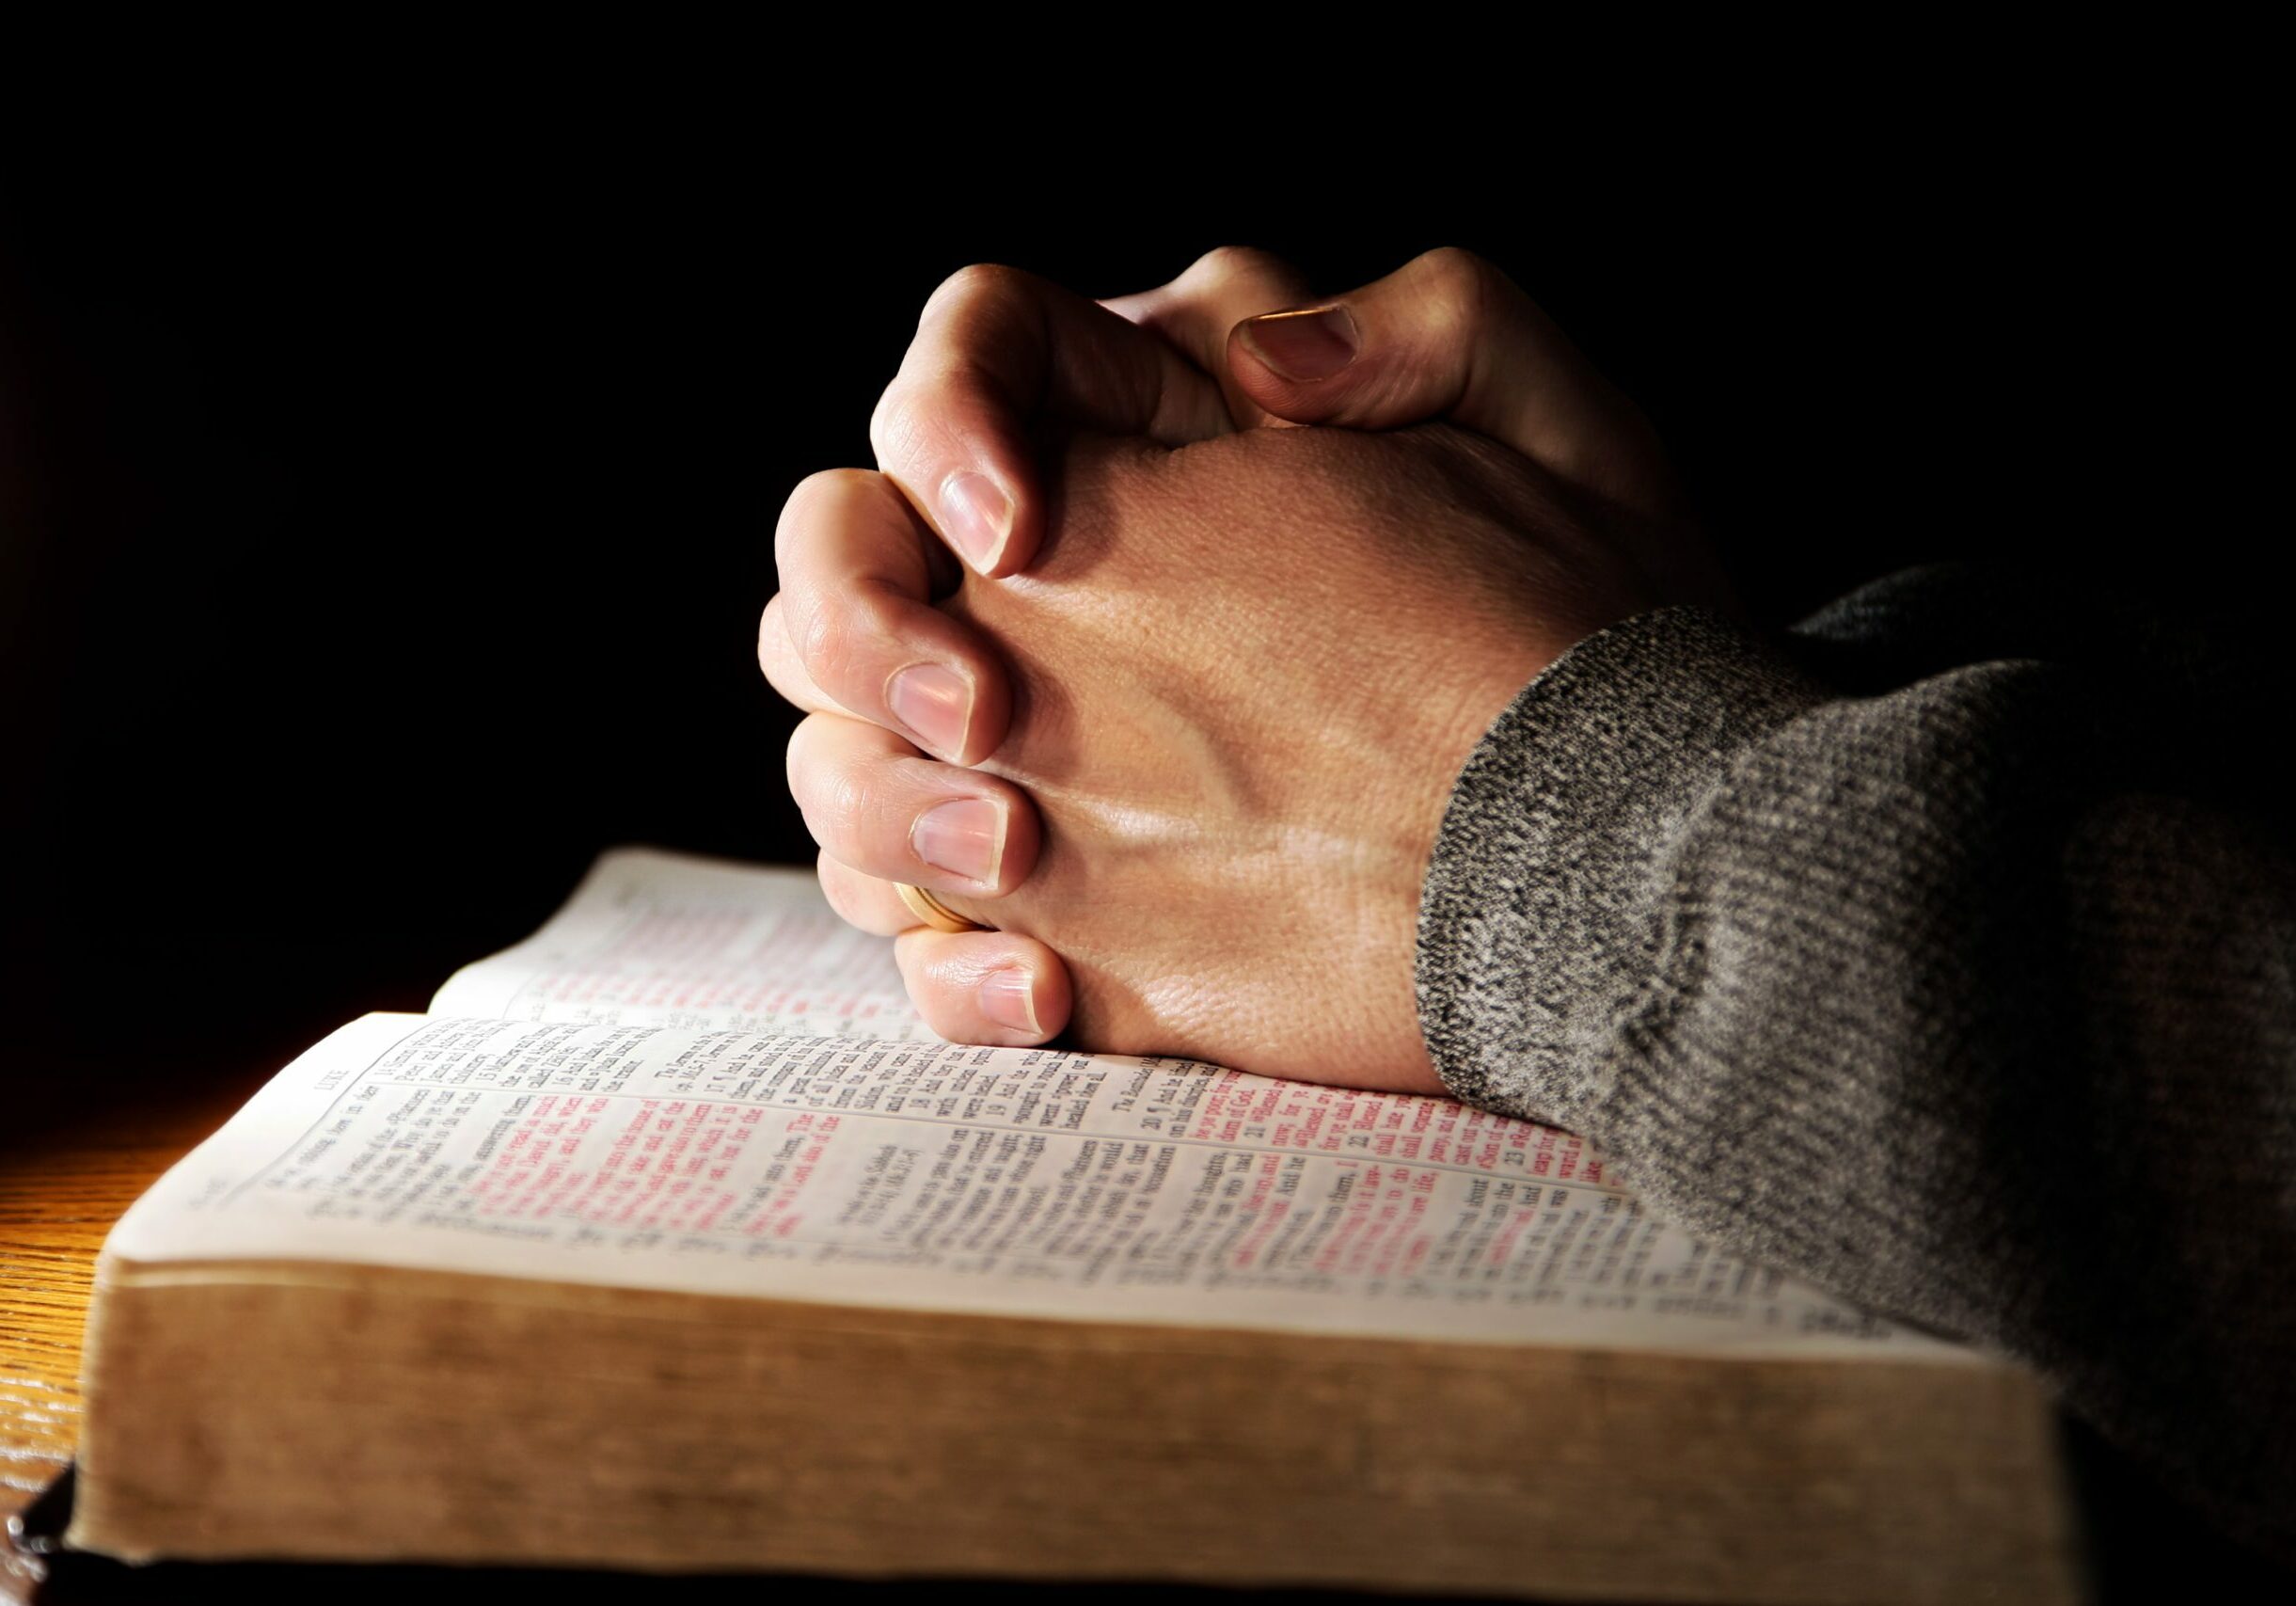 Hands of a man praying in solitude with his Bible (Christian image shallow focus).